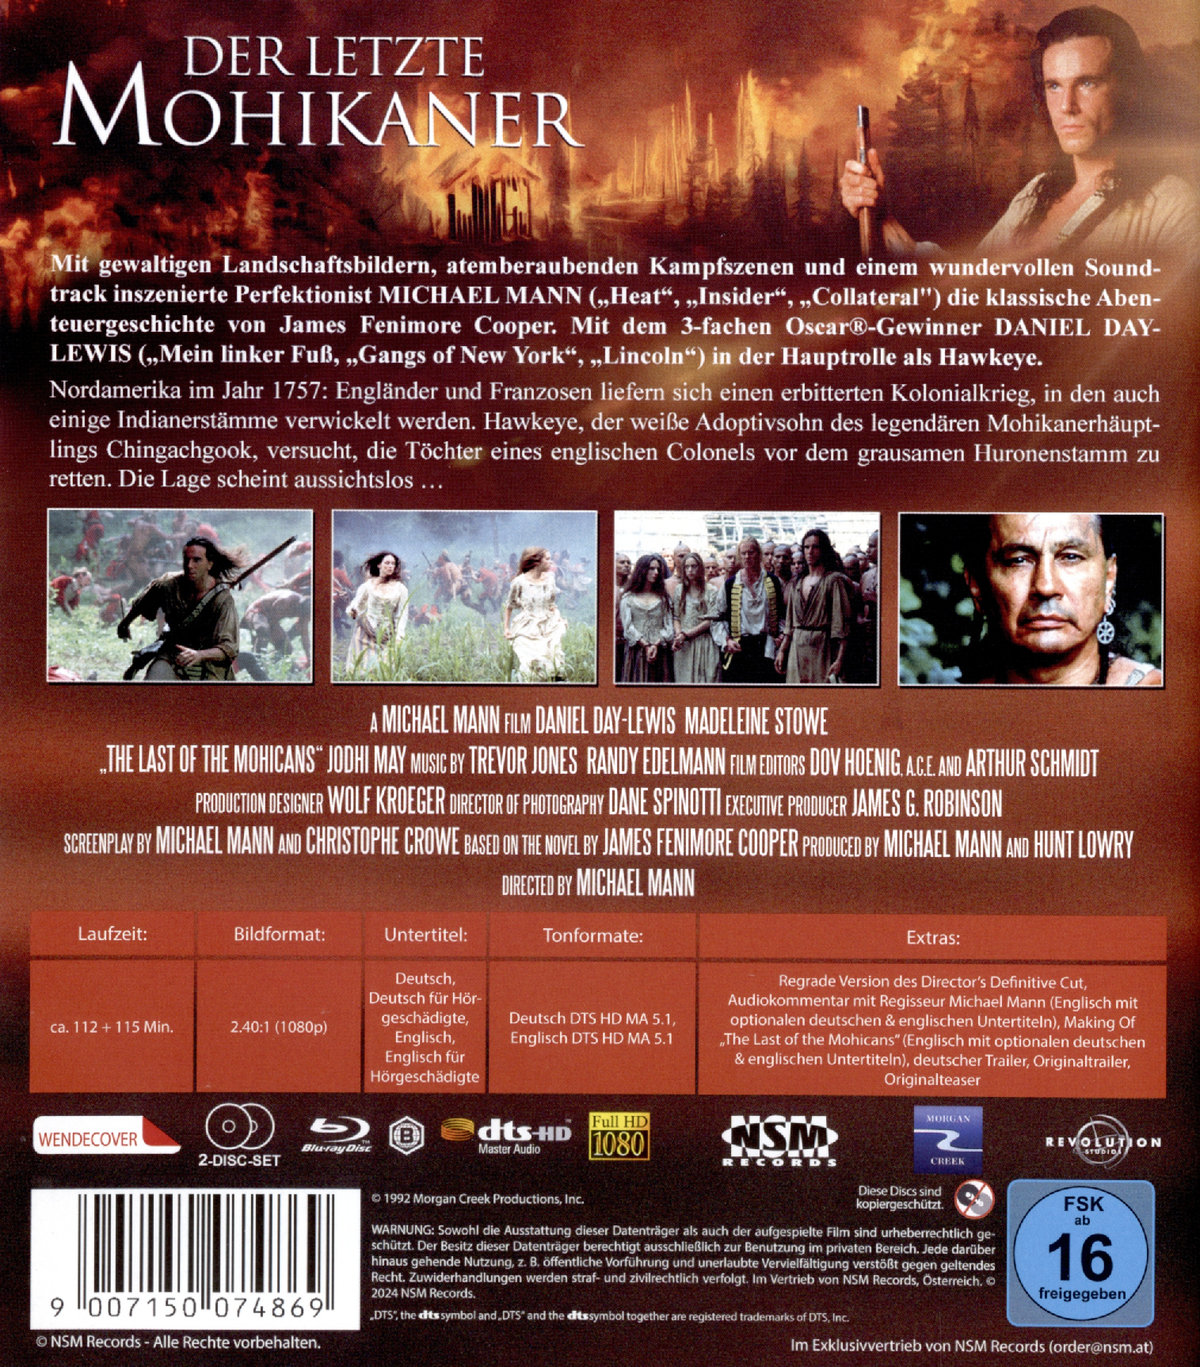 Der letzte Mohikaner (Special Edition)  [2 BRs]  (Blu-ray Disc)